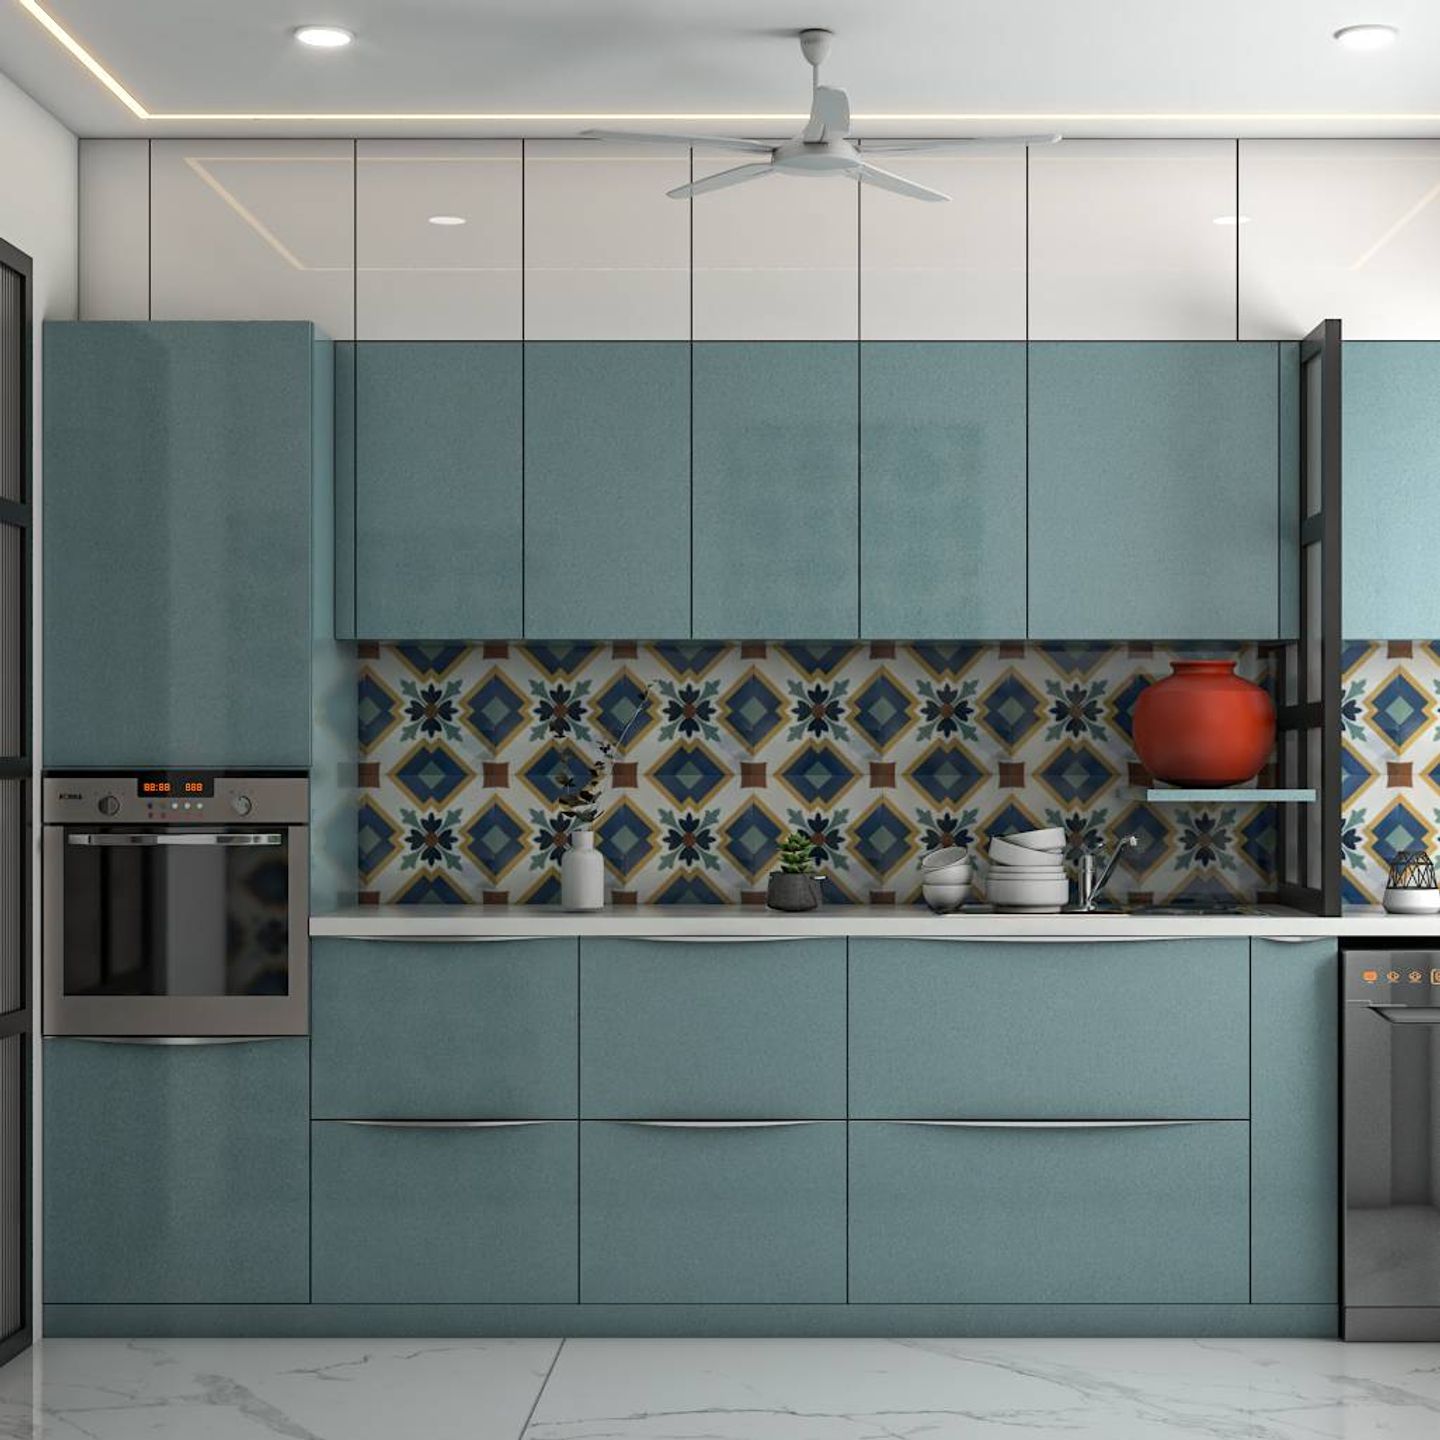 Blue Indian Kitchen Design With Parallel Layout - Livspace